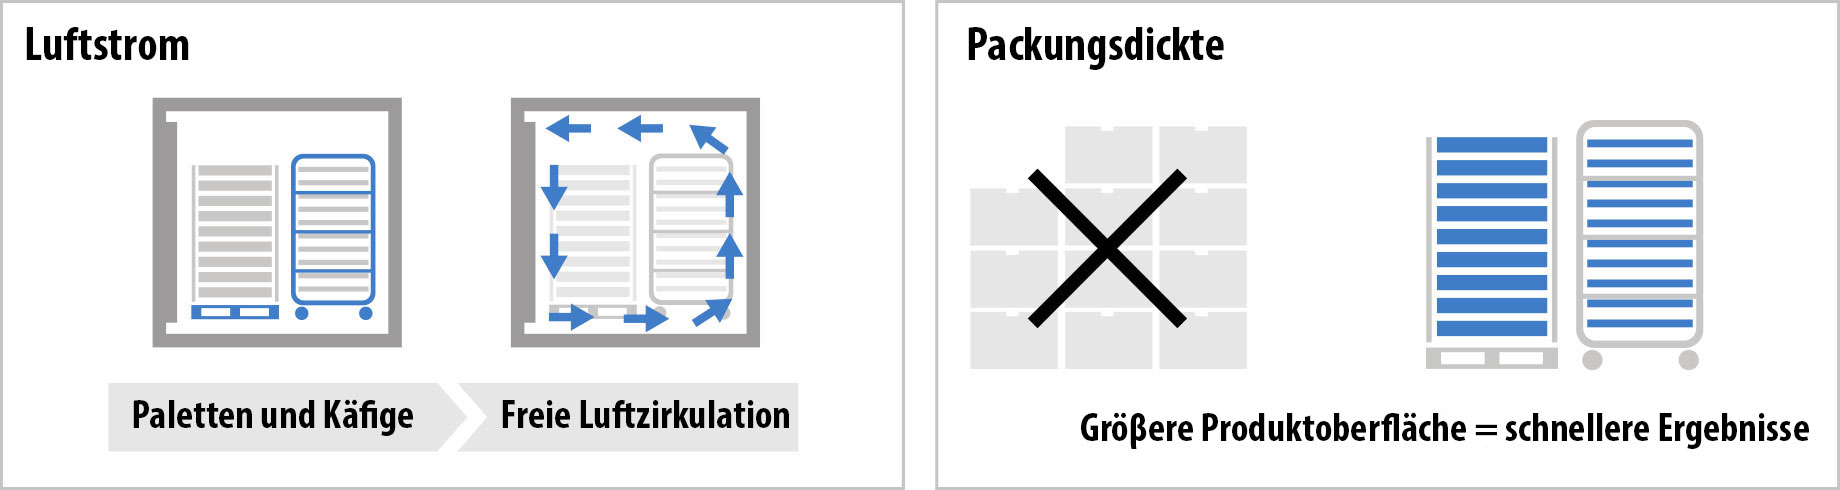 Titan Containers - Luftstrom - Packungsdickte